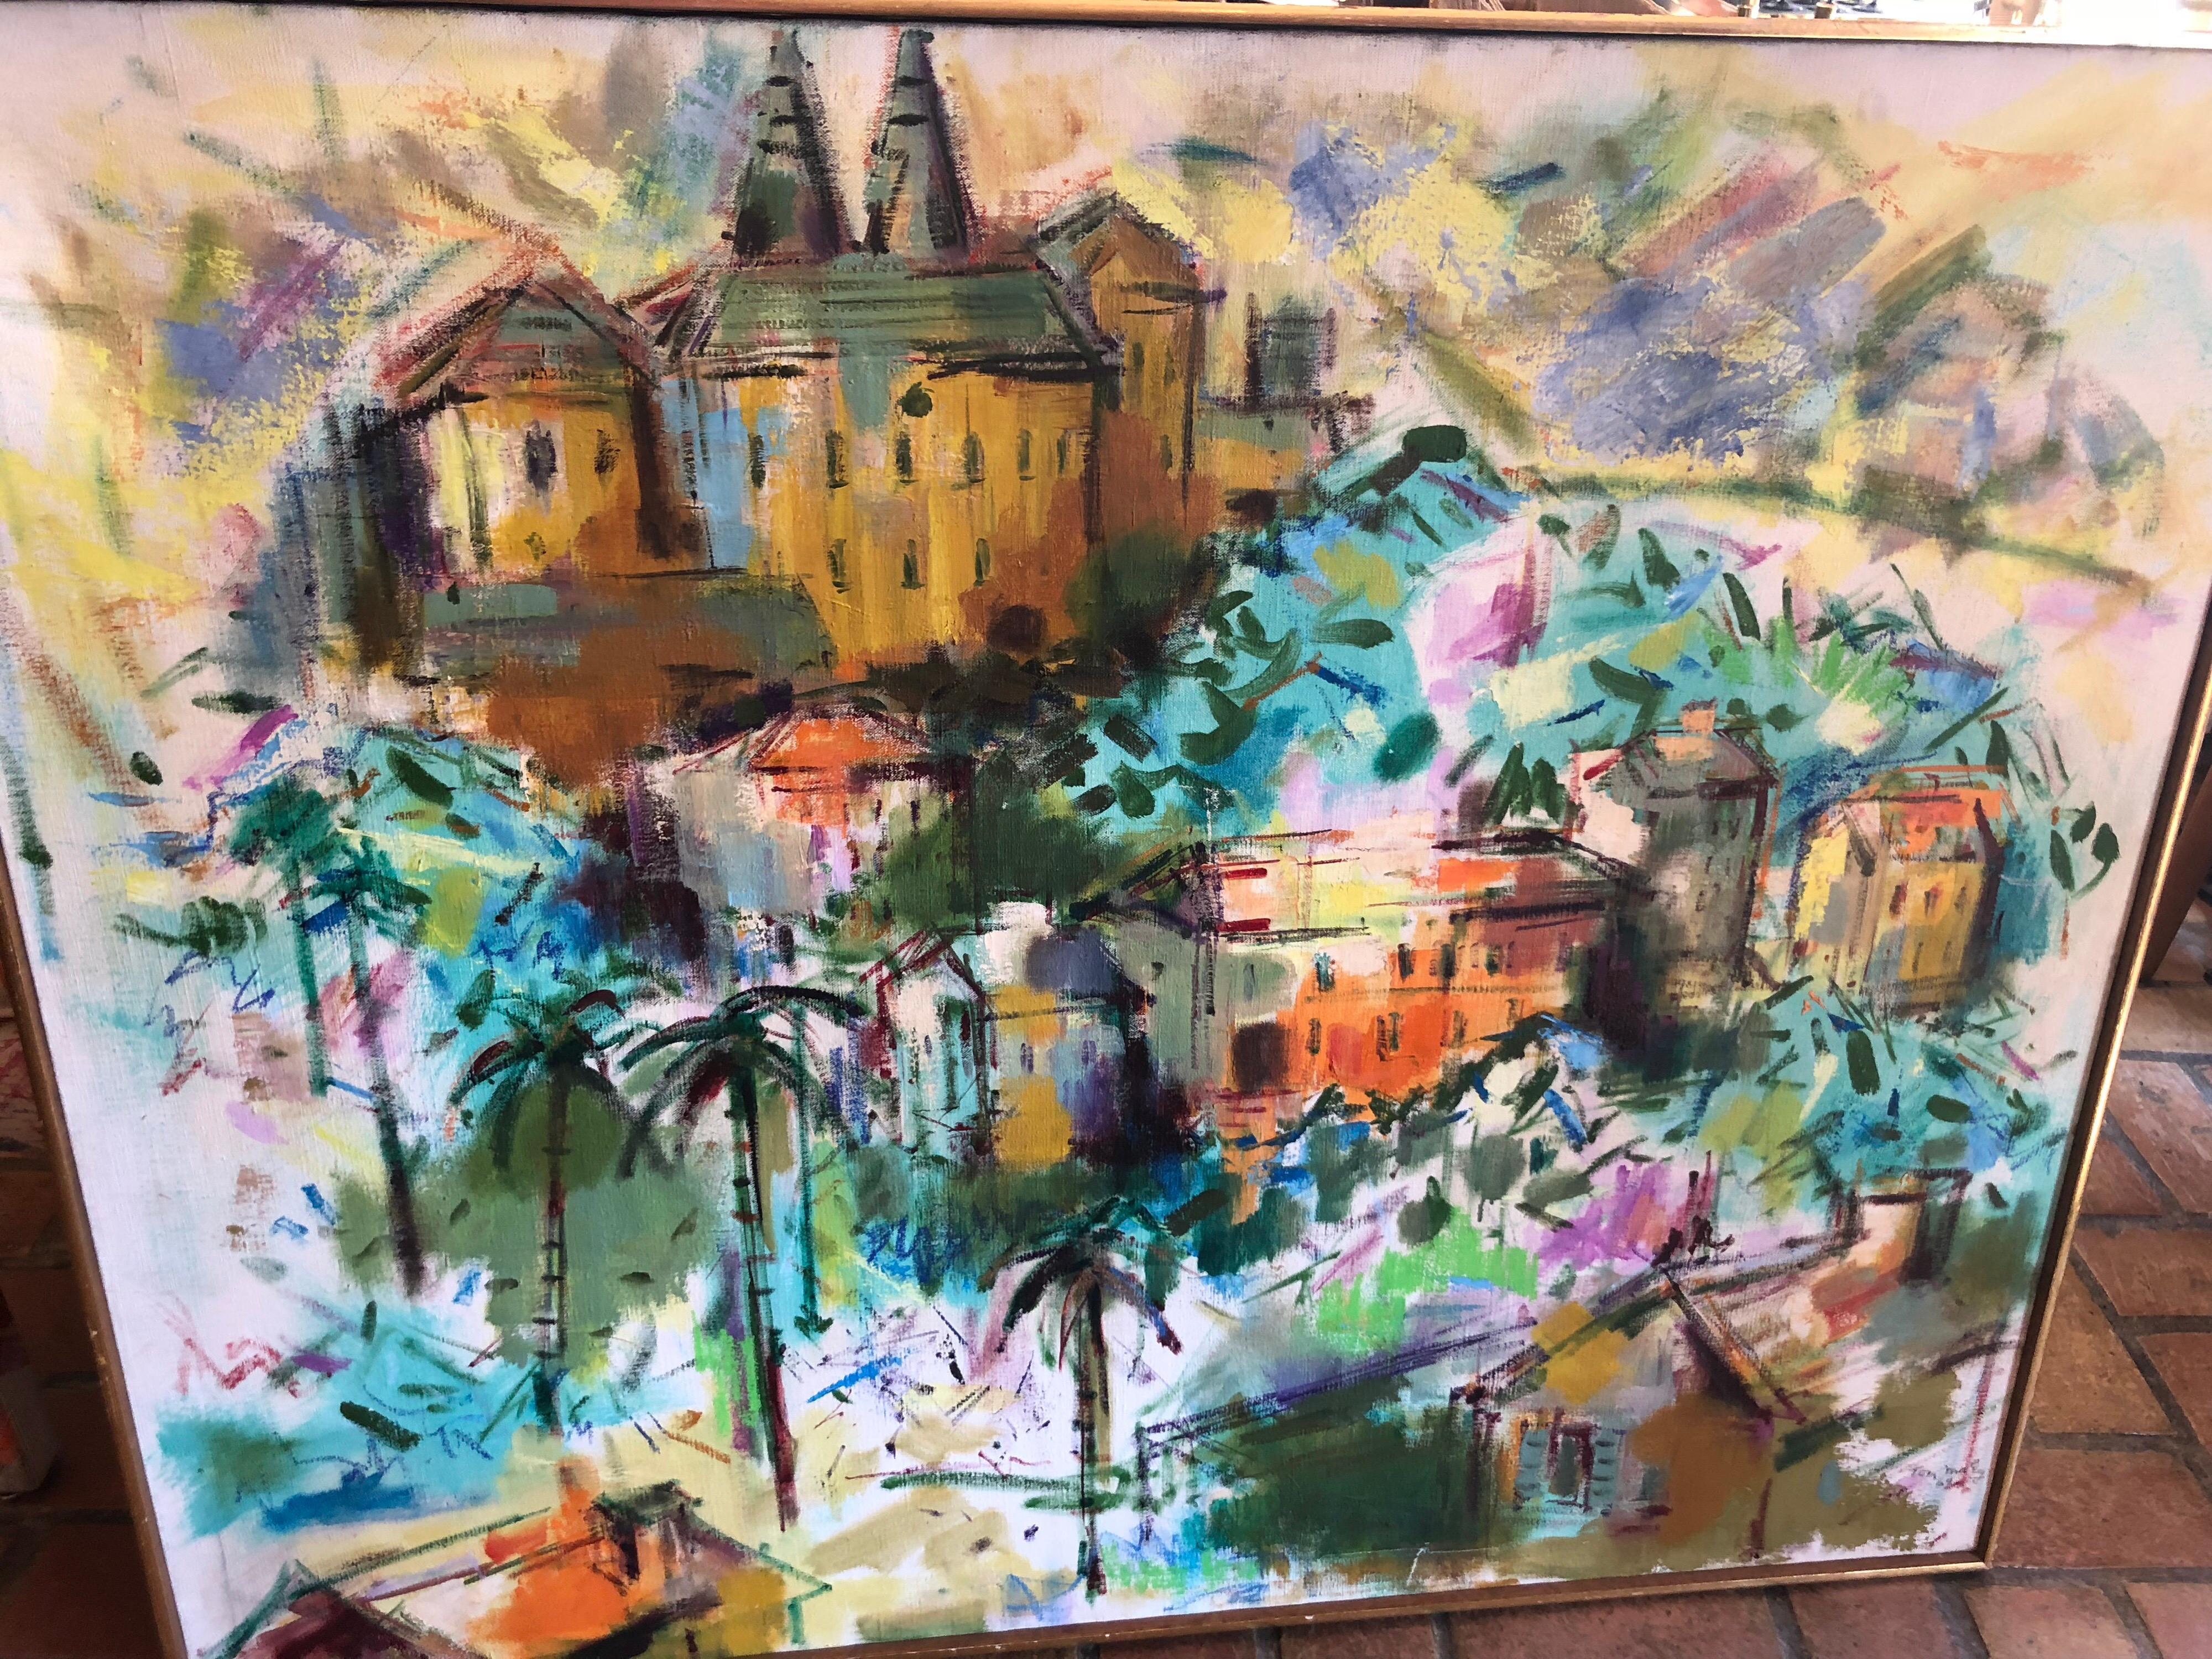 Mid-Century Modern oil on canvas of palm tree village. Vibrant colors and nice square shaped canvas.
Fabulous Hollywood Regency style motif ready for that designer home.Very Palm Beach!Signed and dated lower right 1964. Thomas Maley (1911-2000)